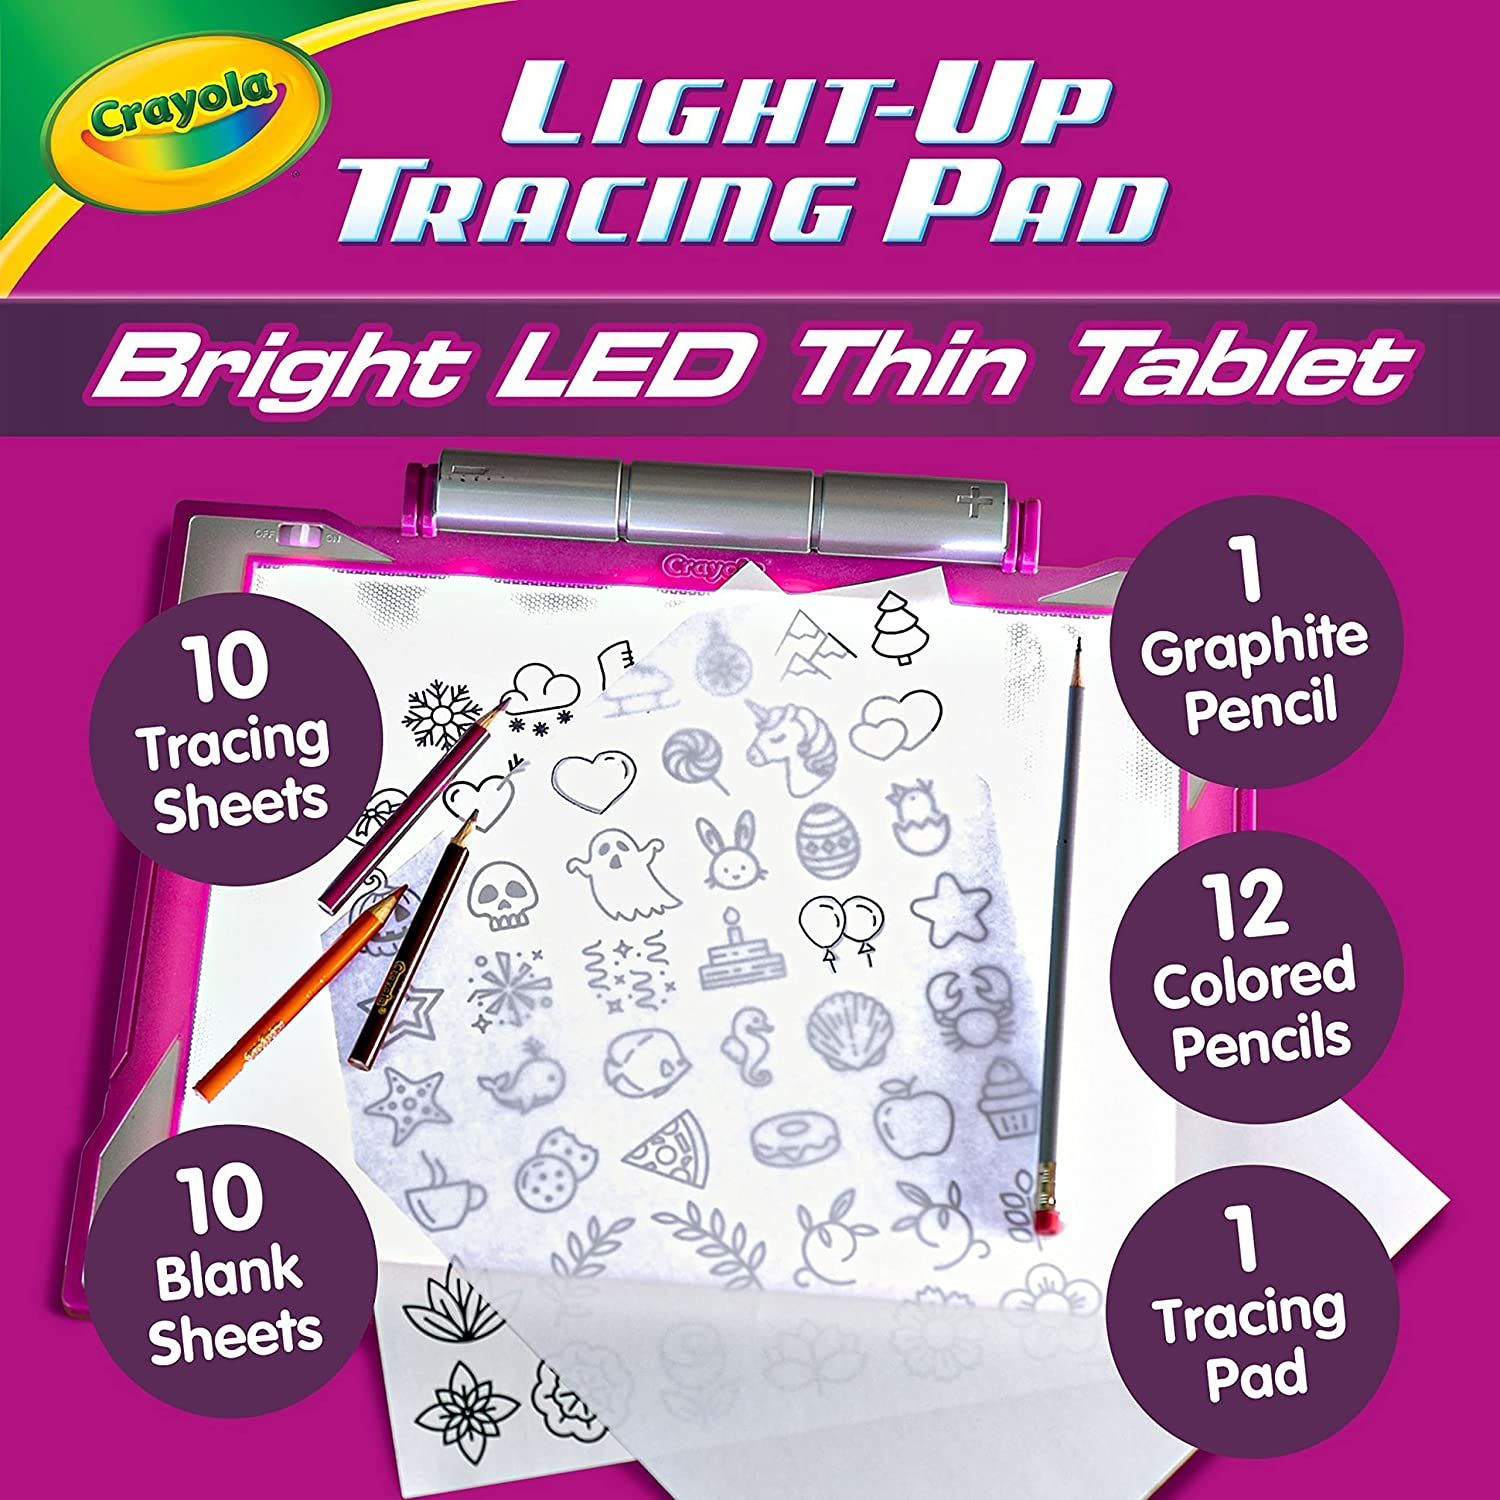 😊 welcome😊 Crayola Light-up Tracing Pad, Pink, Hobbies & Toys